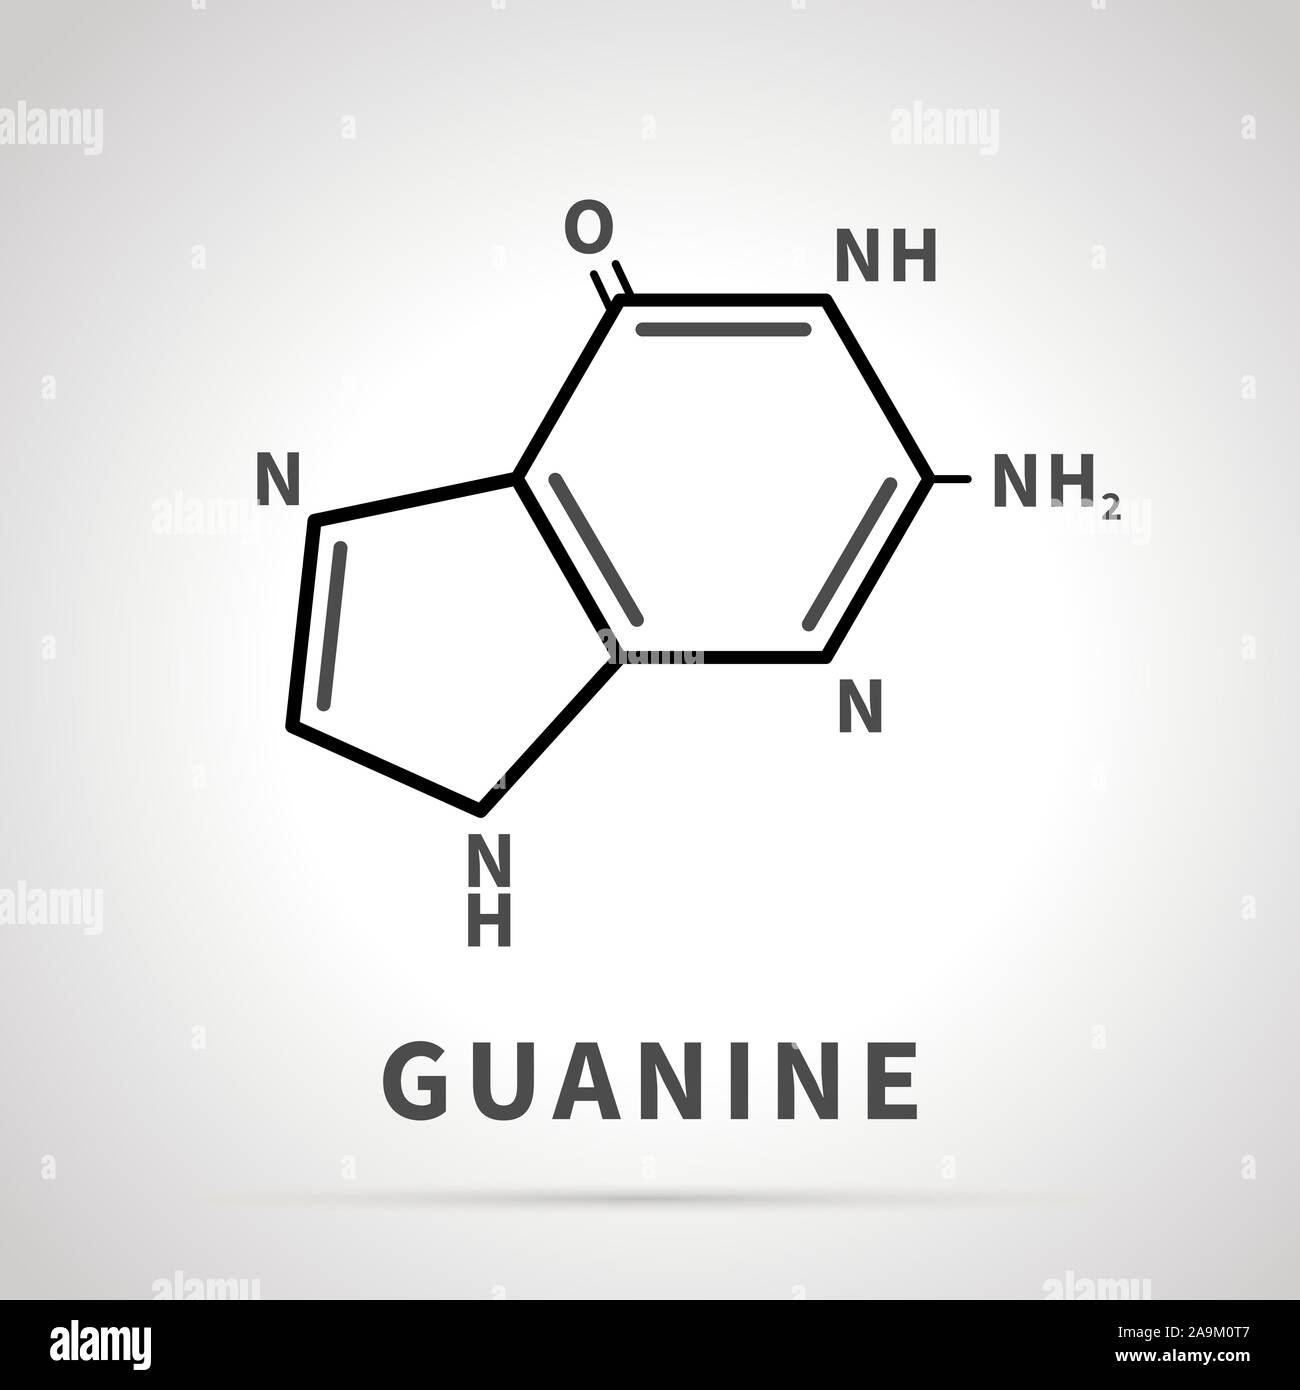 Chemical structure of Guanine, one of the four main nucleobases, simple black icon Stock Vector